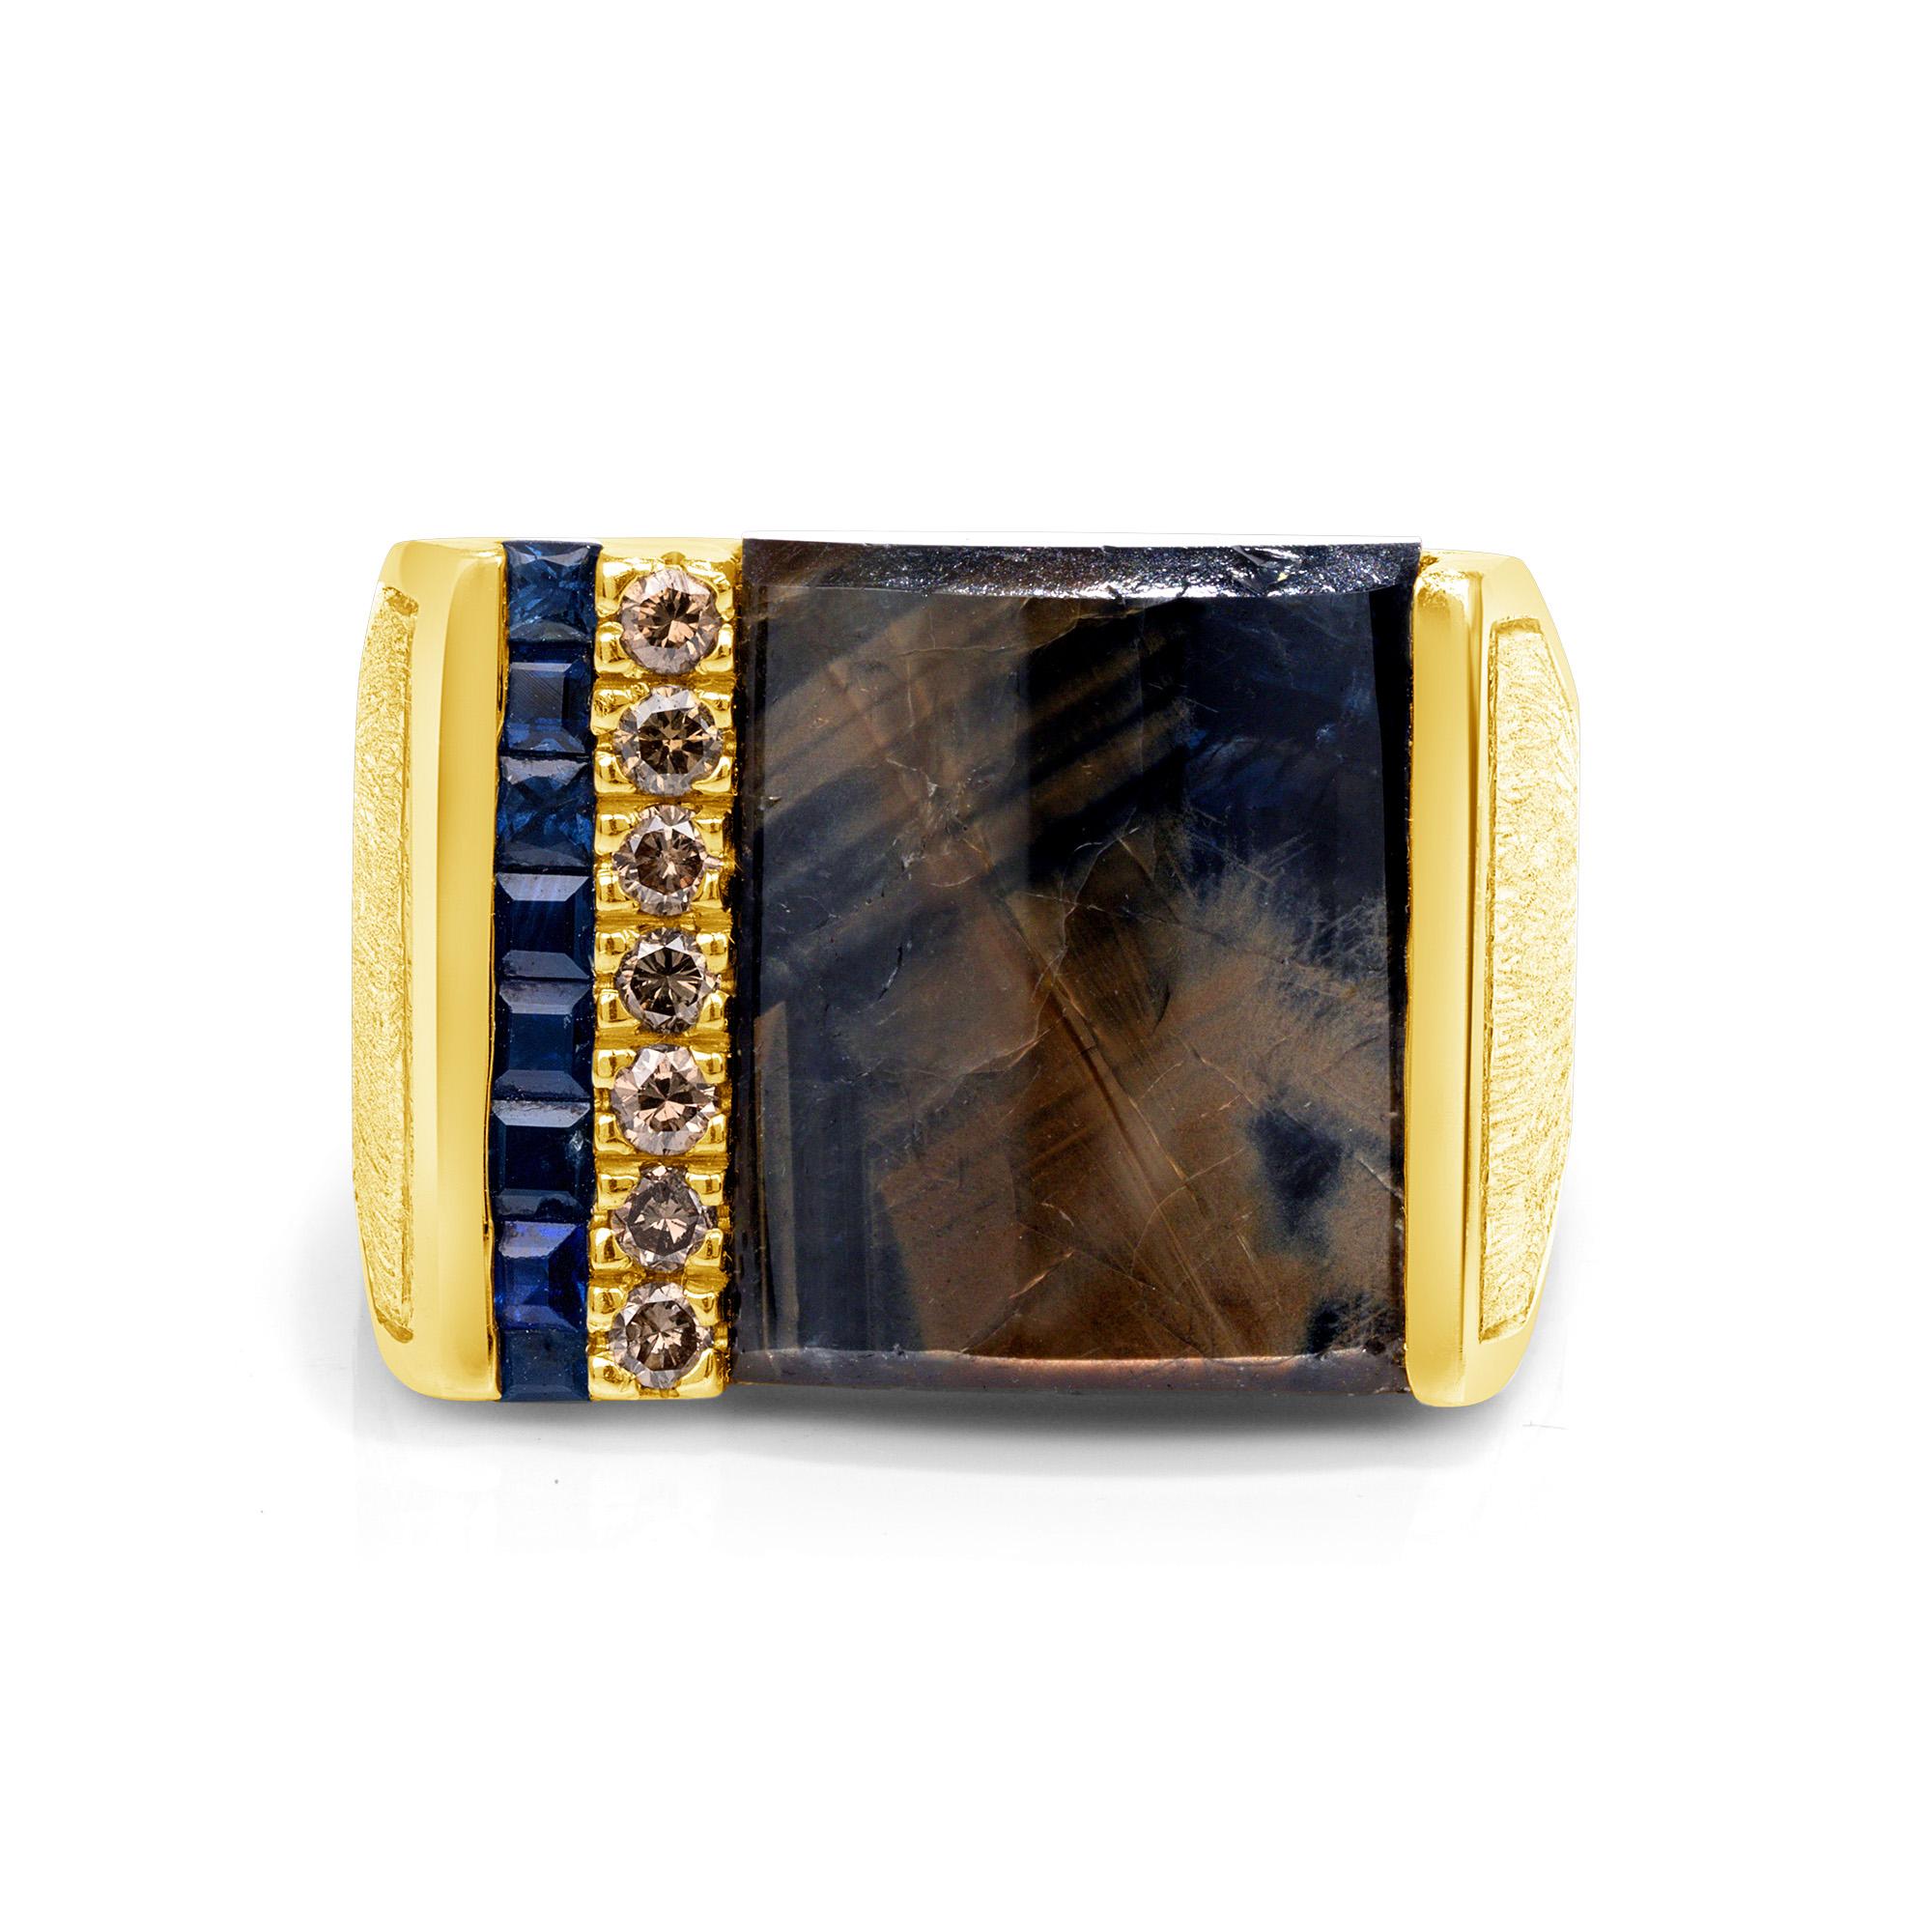 14.77 Carat GoldSheen Sapphire Diamonds Blue Sapphire Yellow Gold Men's Ring, In Stock.

This Goldsheen Sapphire men's ring requires no treatments. 
The biggest stone on the ring is a 14.77-carat Goldsheen Sapphire. 
It was hand fabricated in